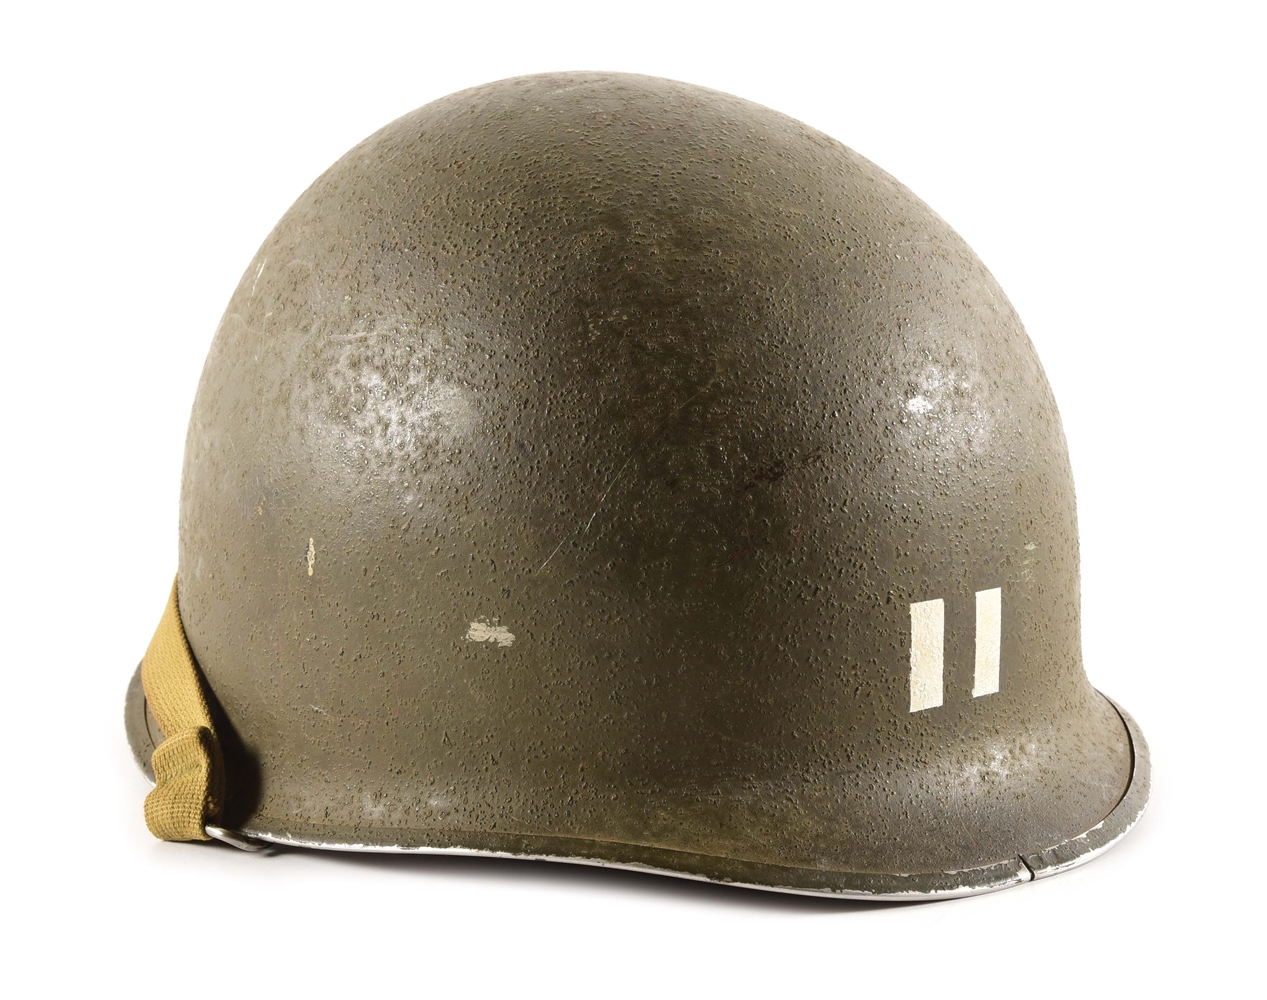 US WWII M1 FRONT SEAM SWIVEL BALE CAPTAINS HELMET WITH LINER.